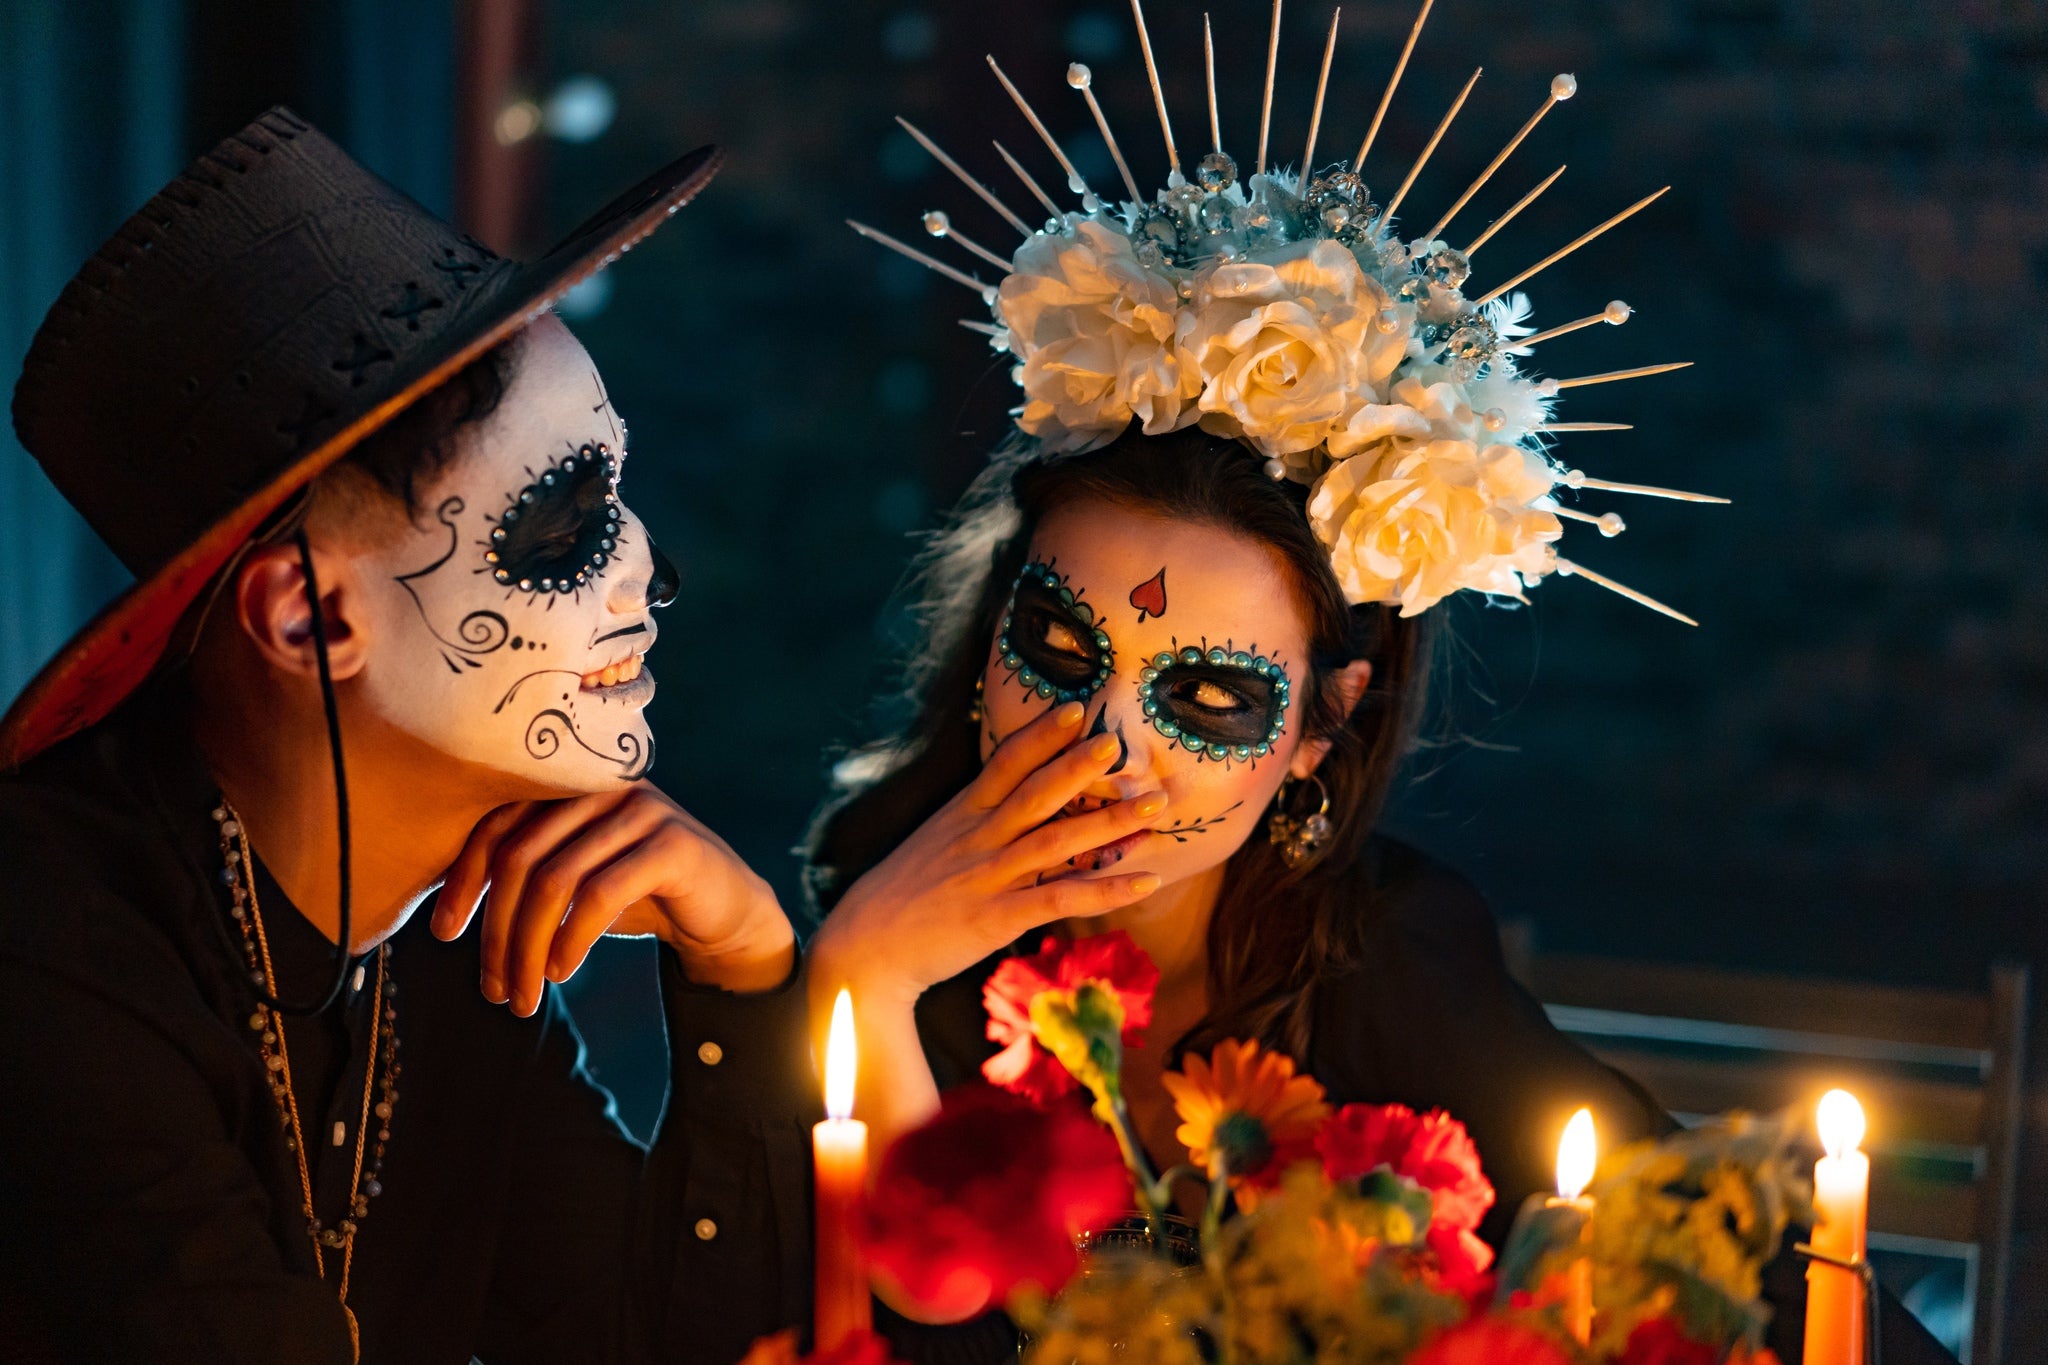 A sweet couple in Halloween costume smiling at each other over a candle lit dinner